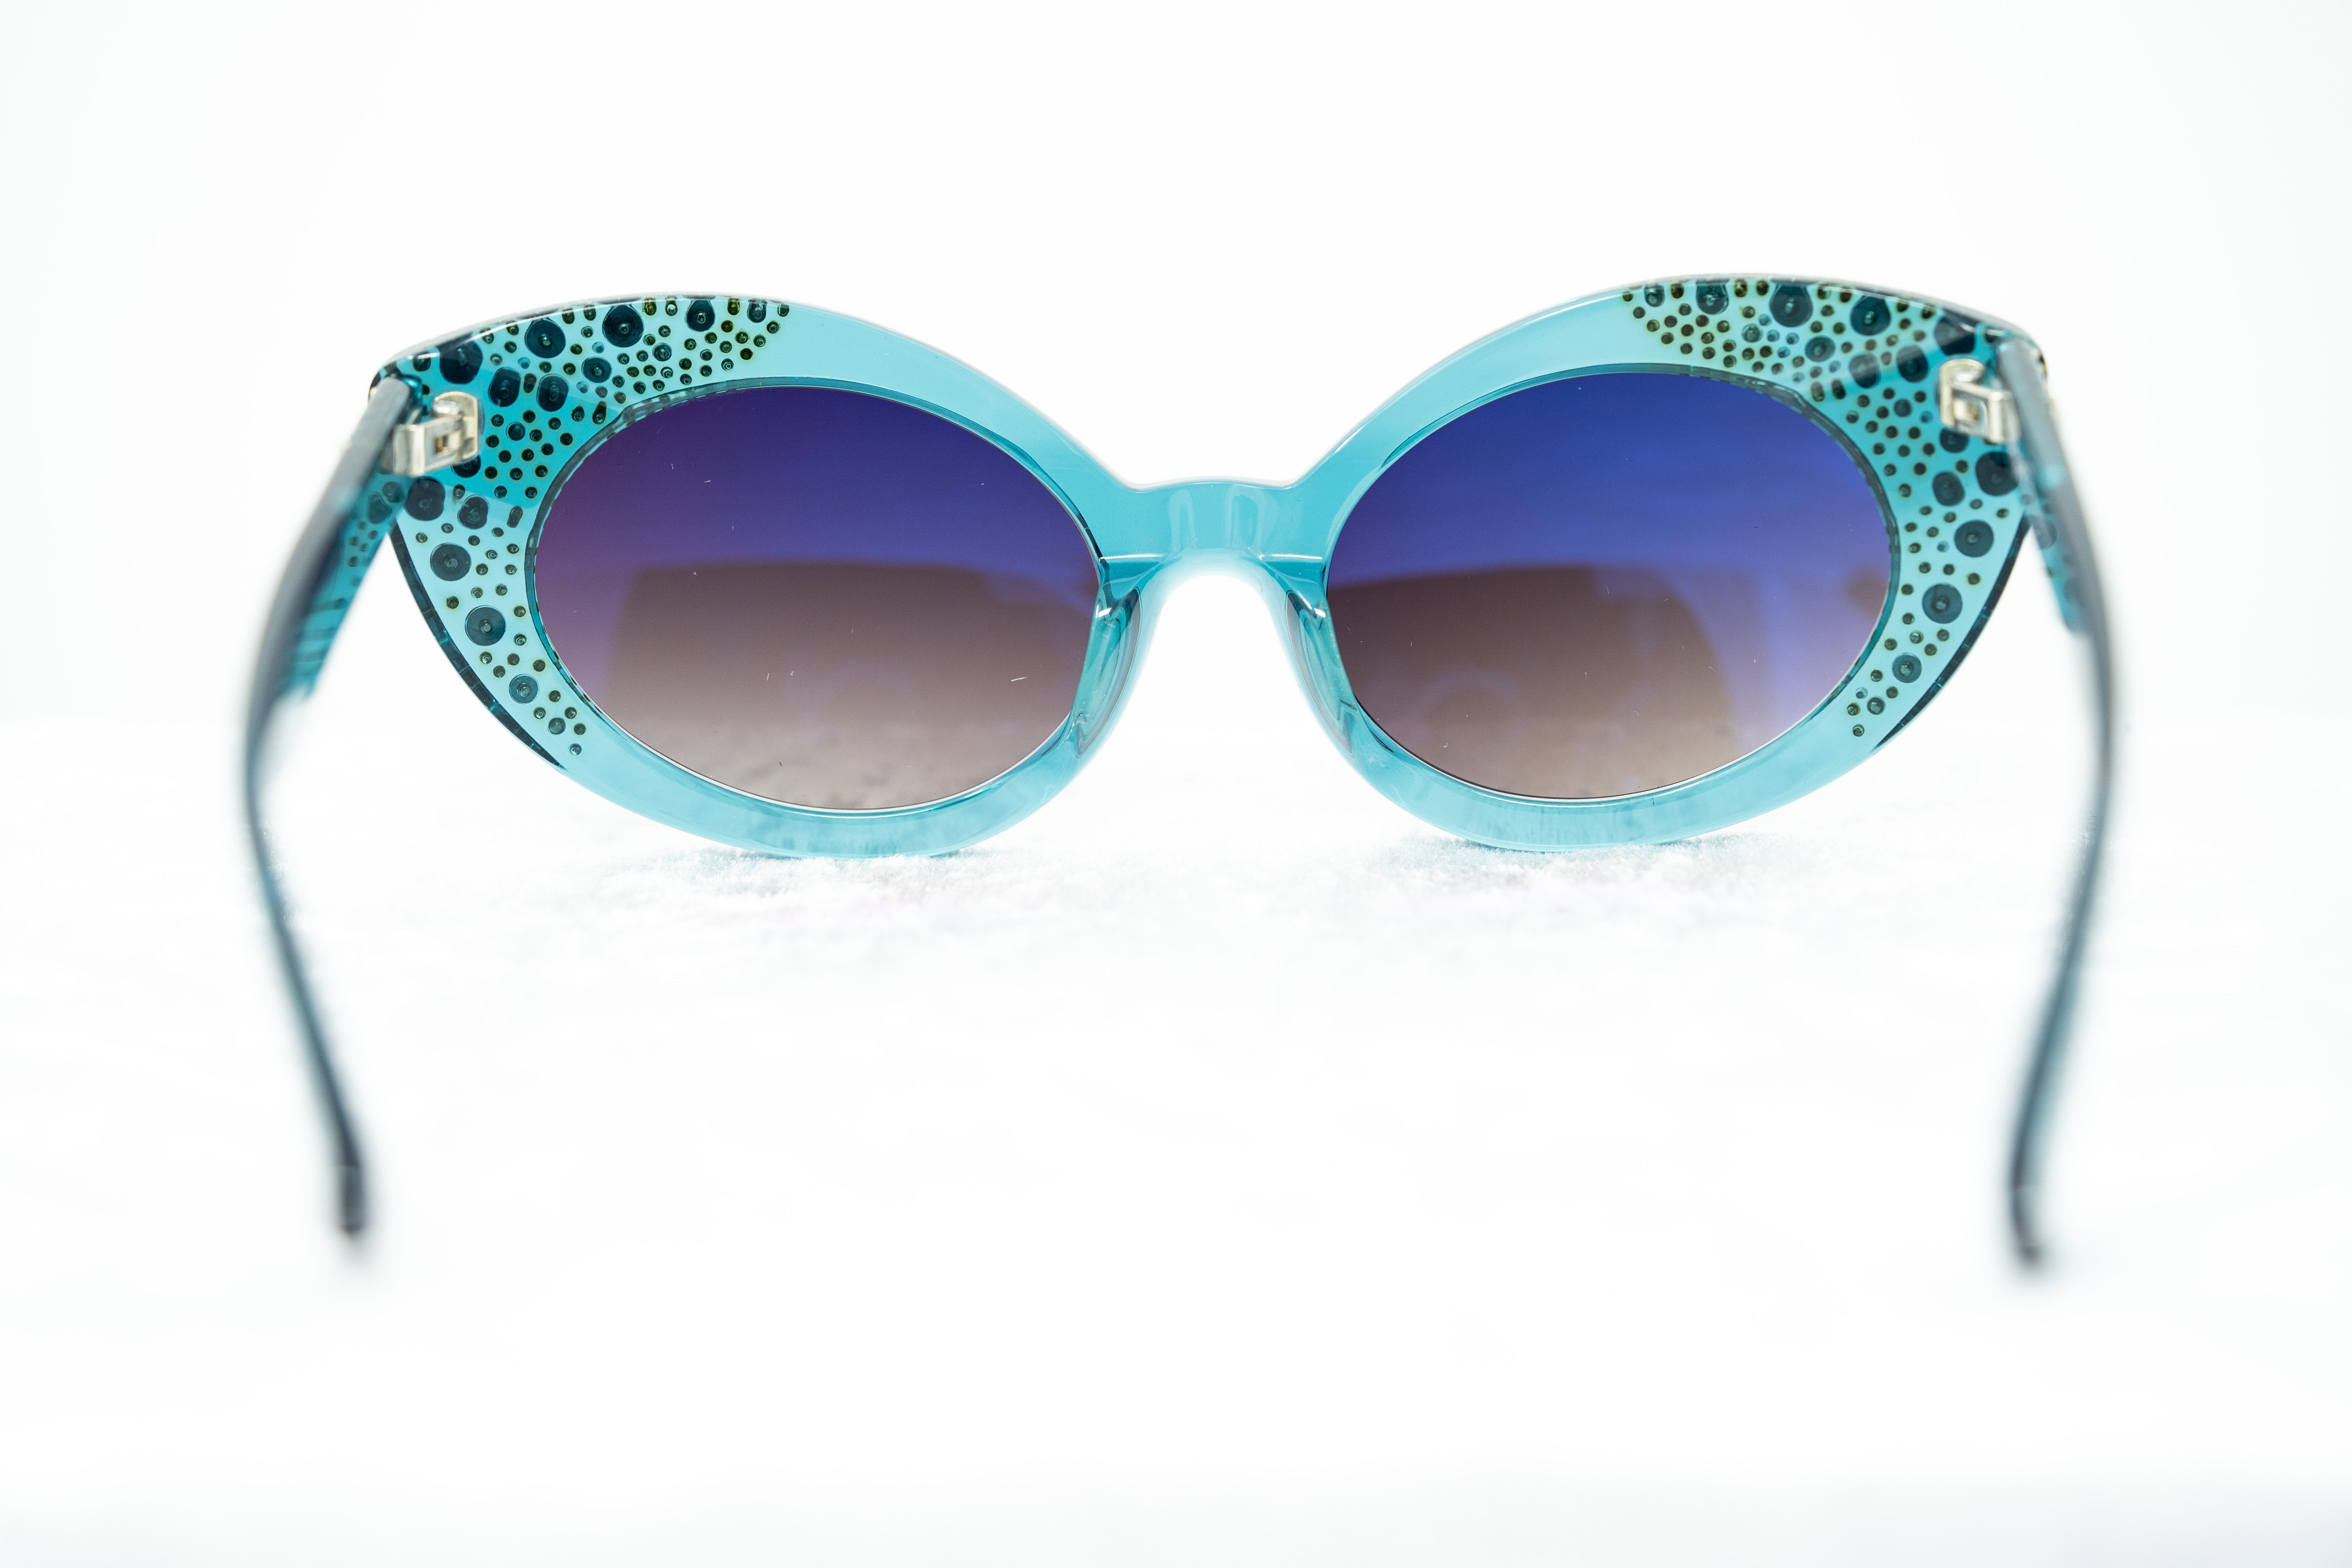 Agent Provocateur Sunglasses Cat Eye Blue and Grey